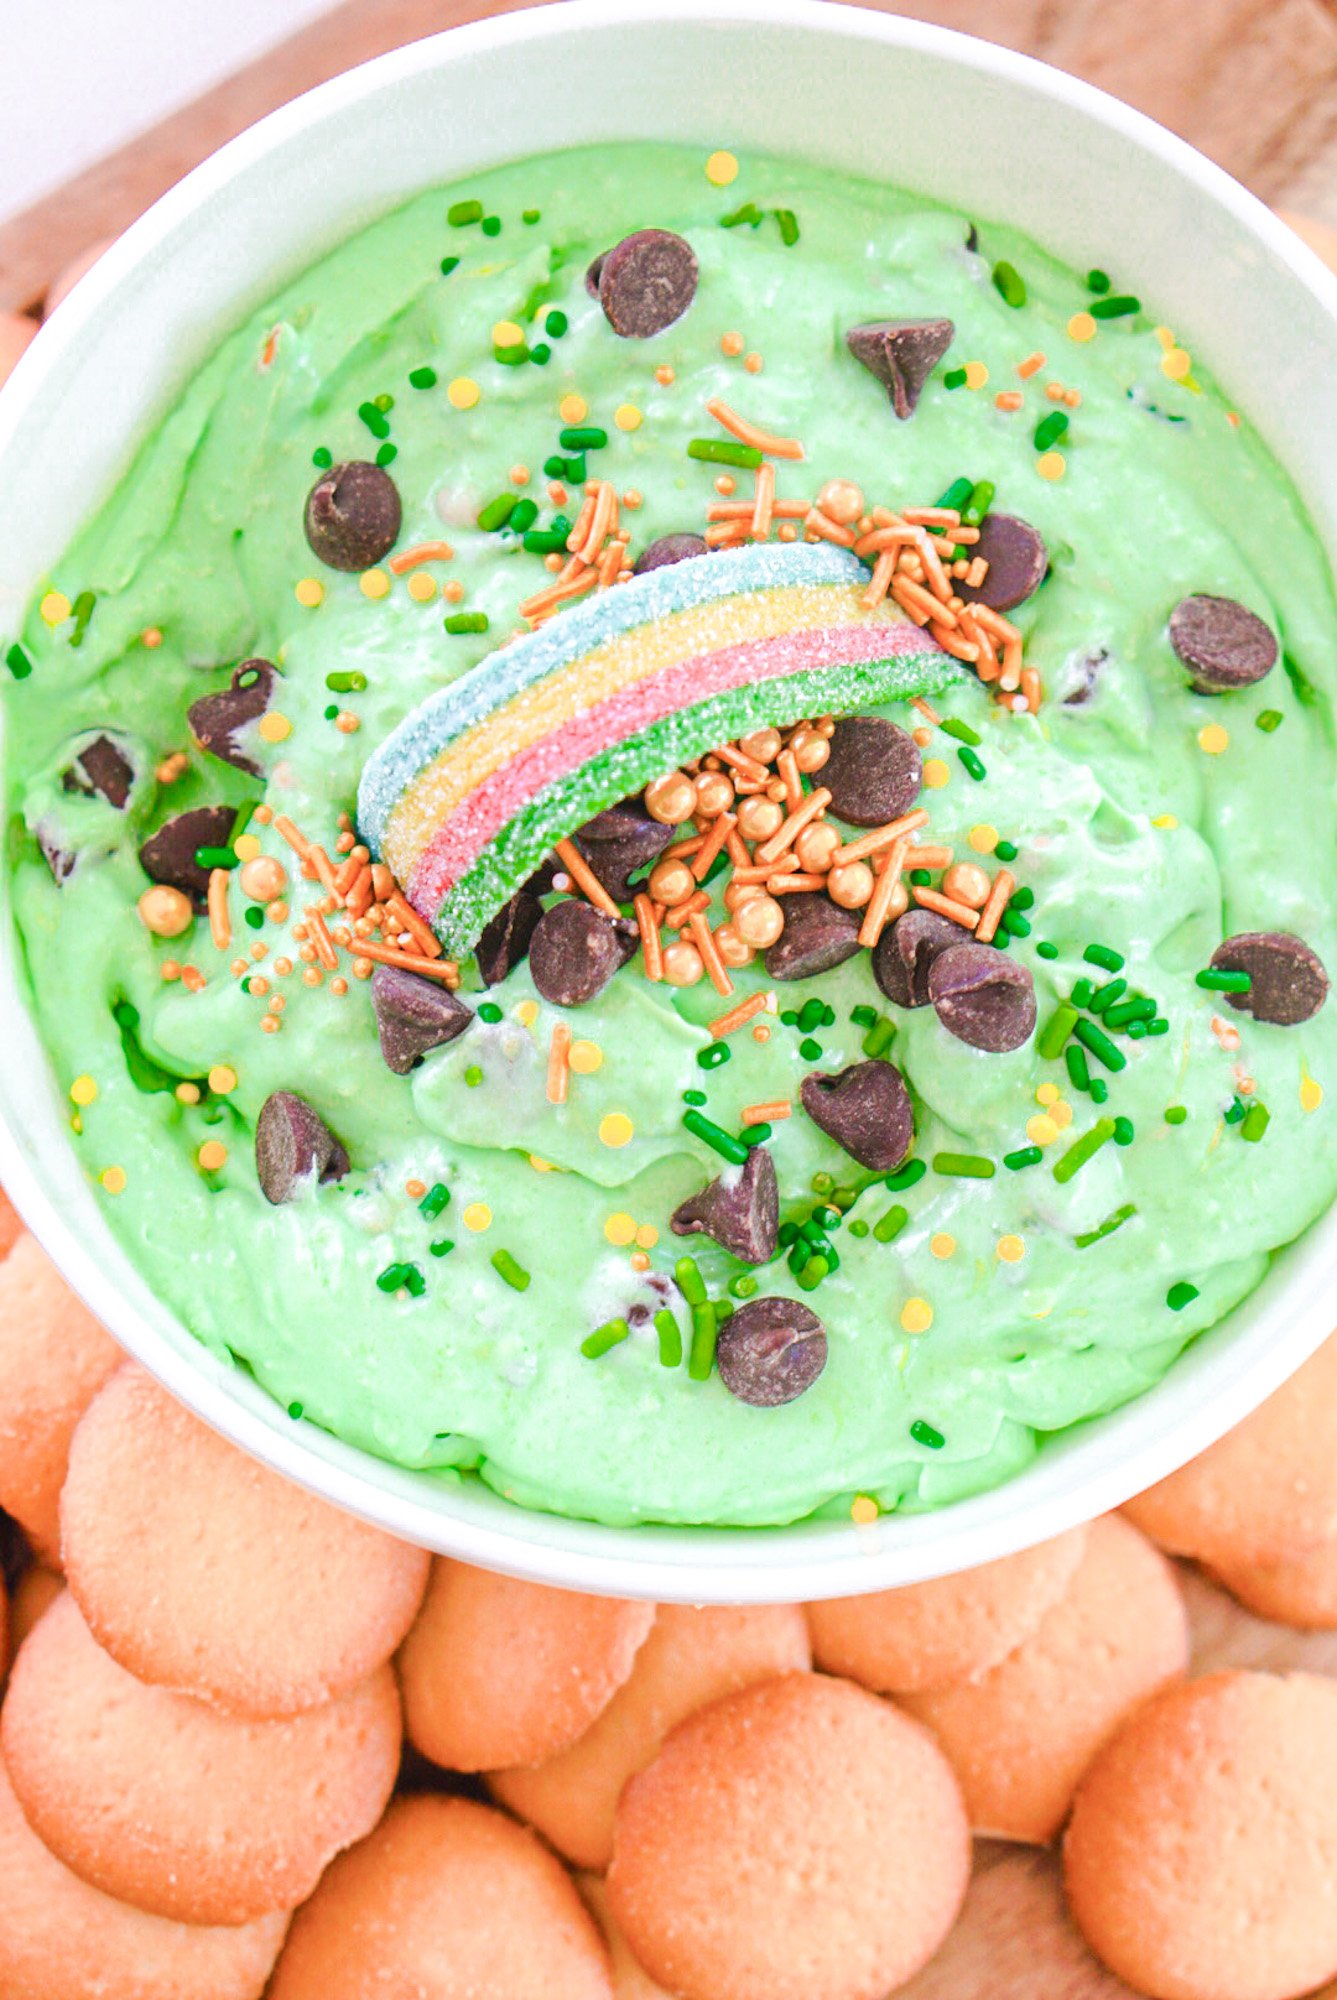 over the top view of leprechaun dip served with vanilla wafers